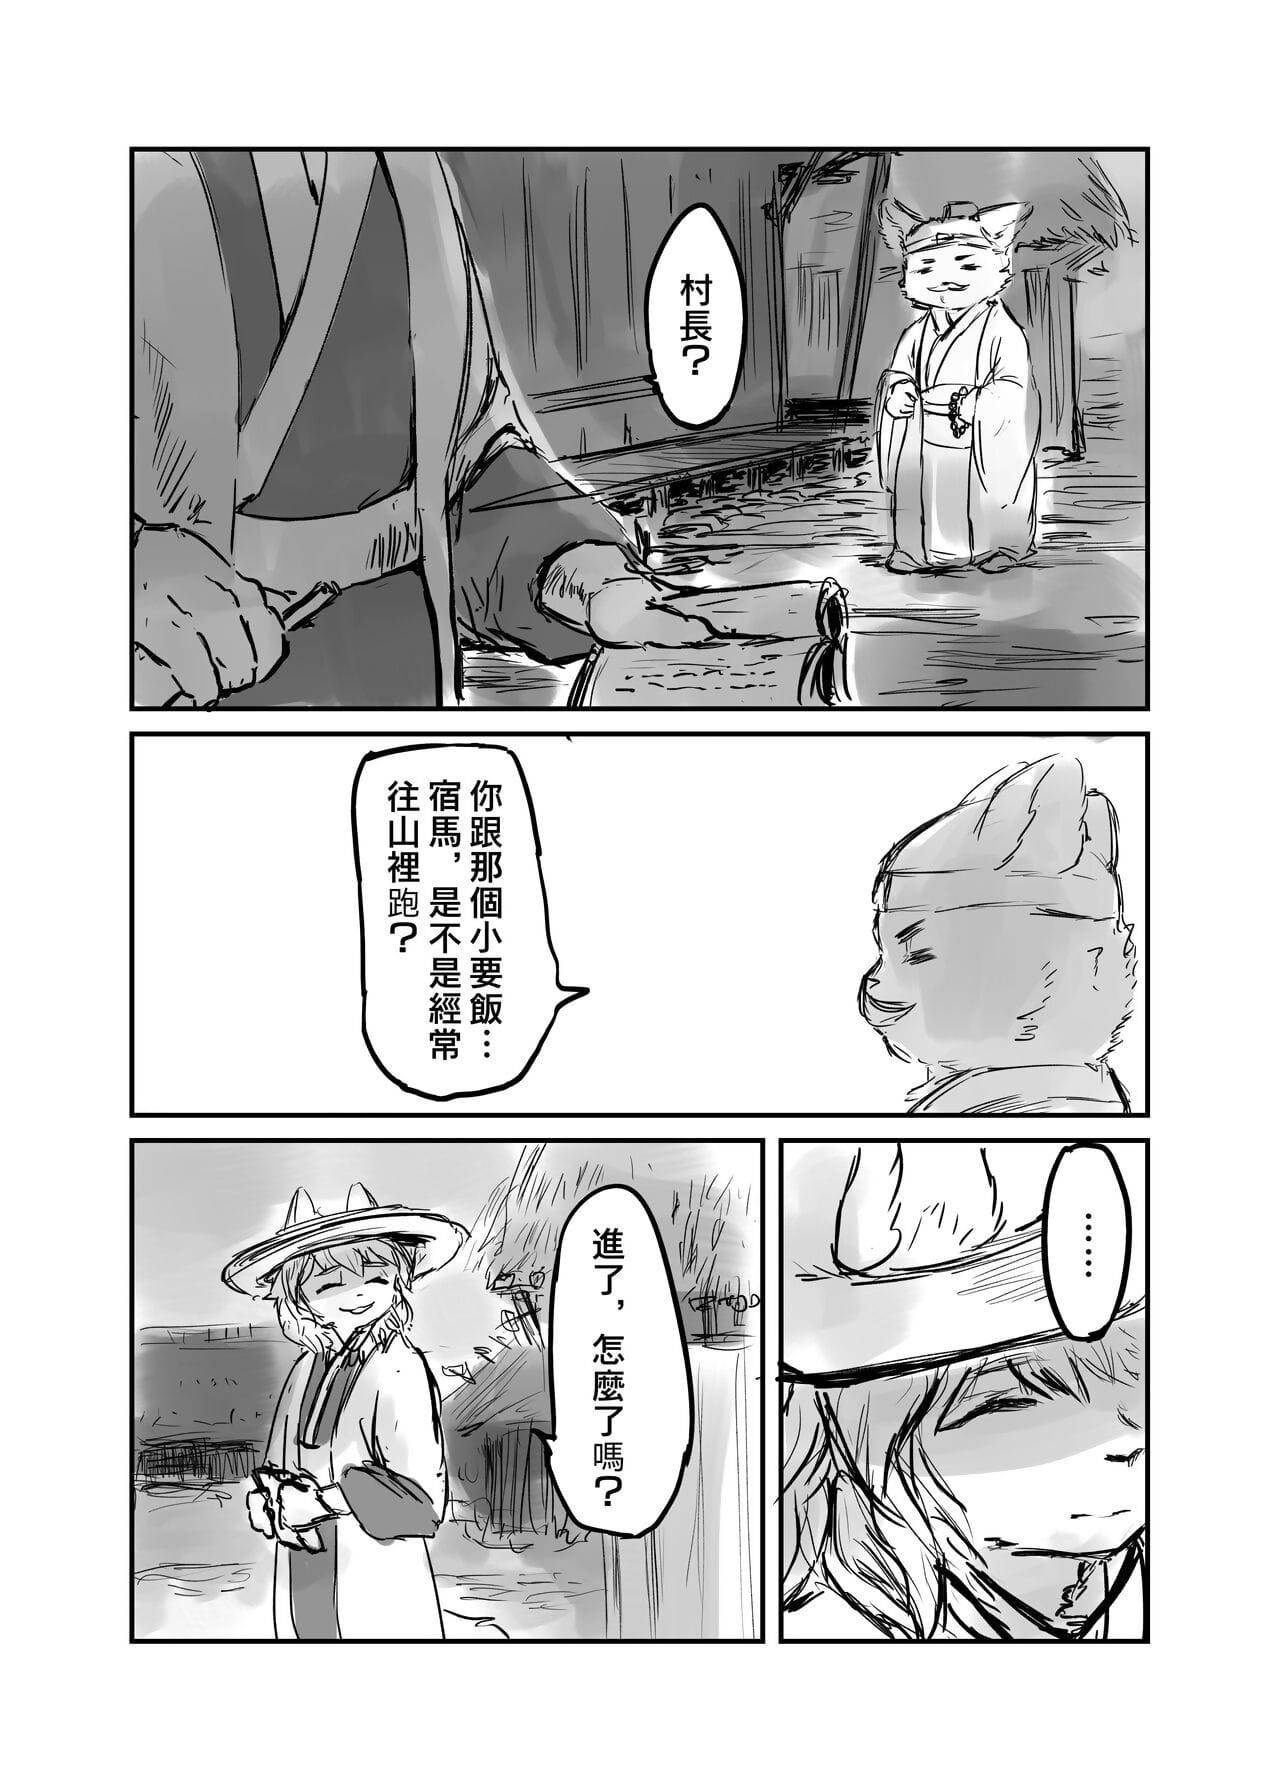 （the visitatore 他乡之人 by：鬼流 page 1